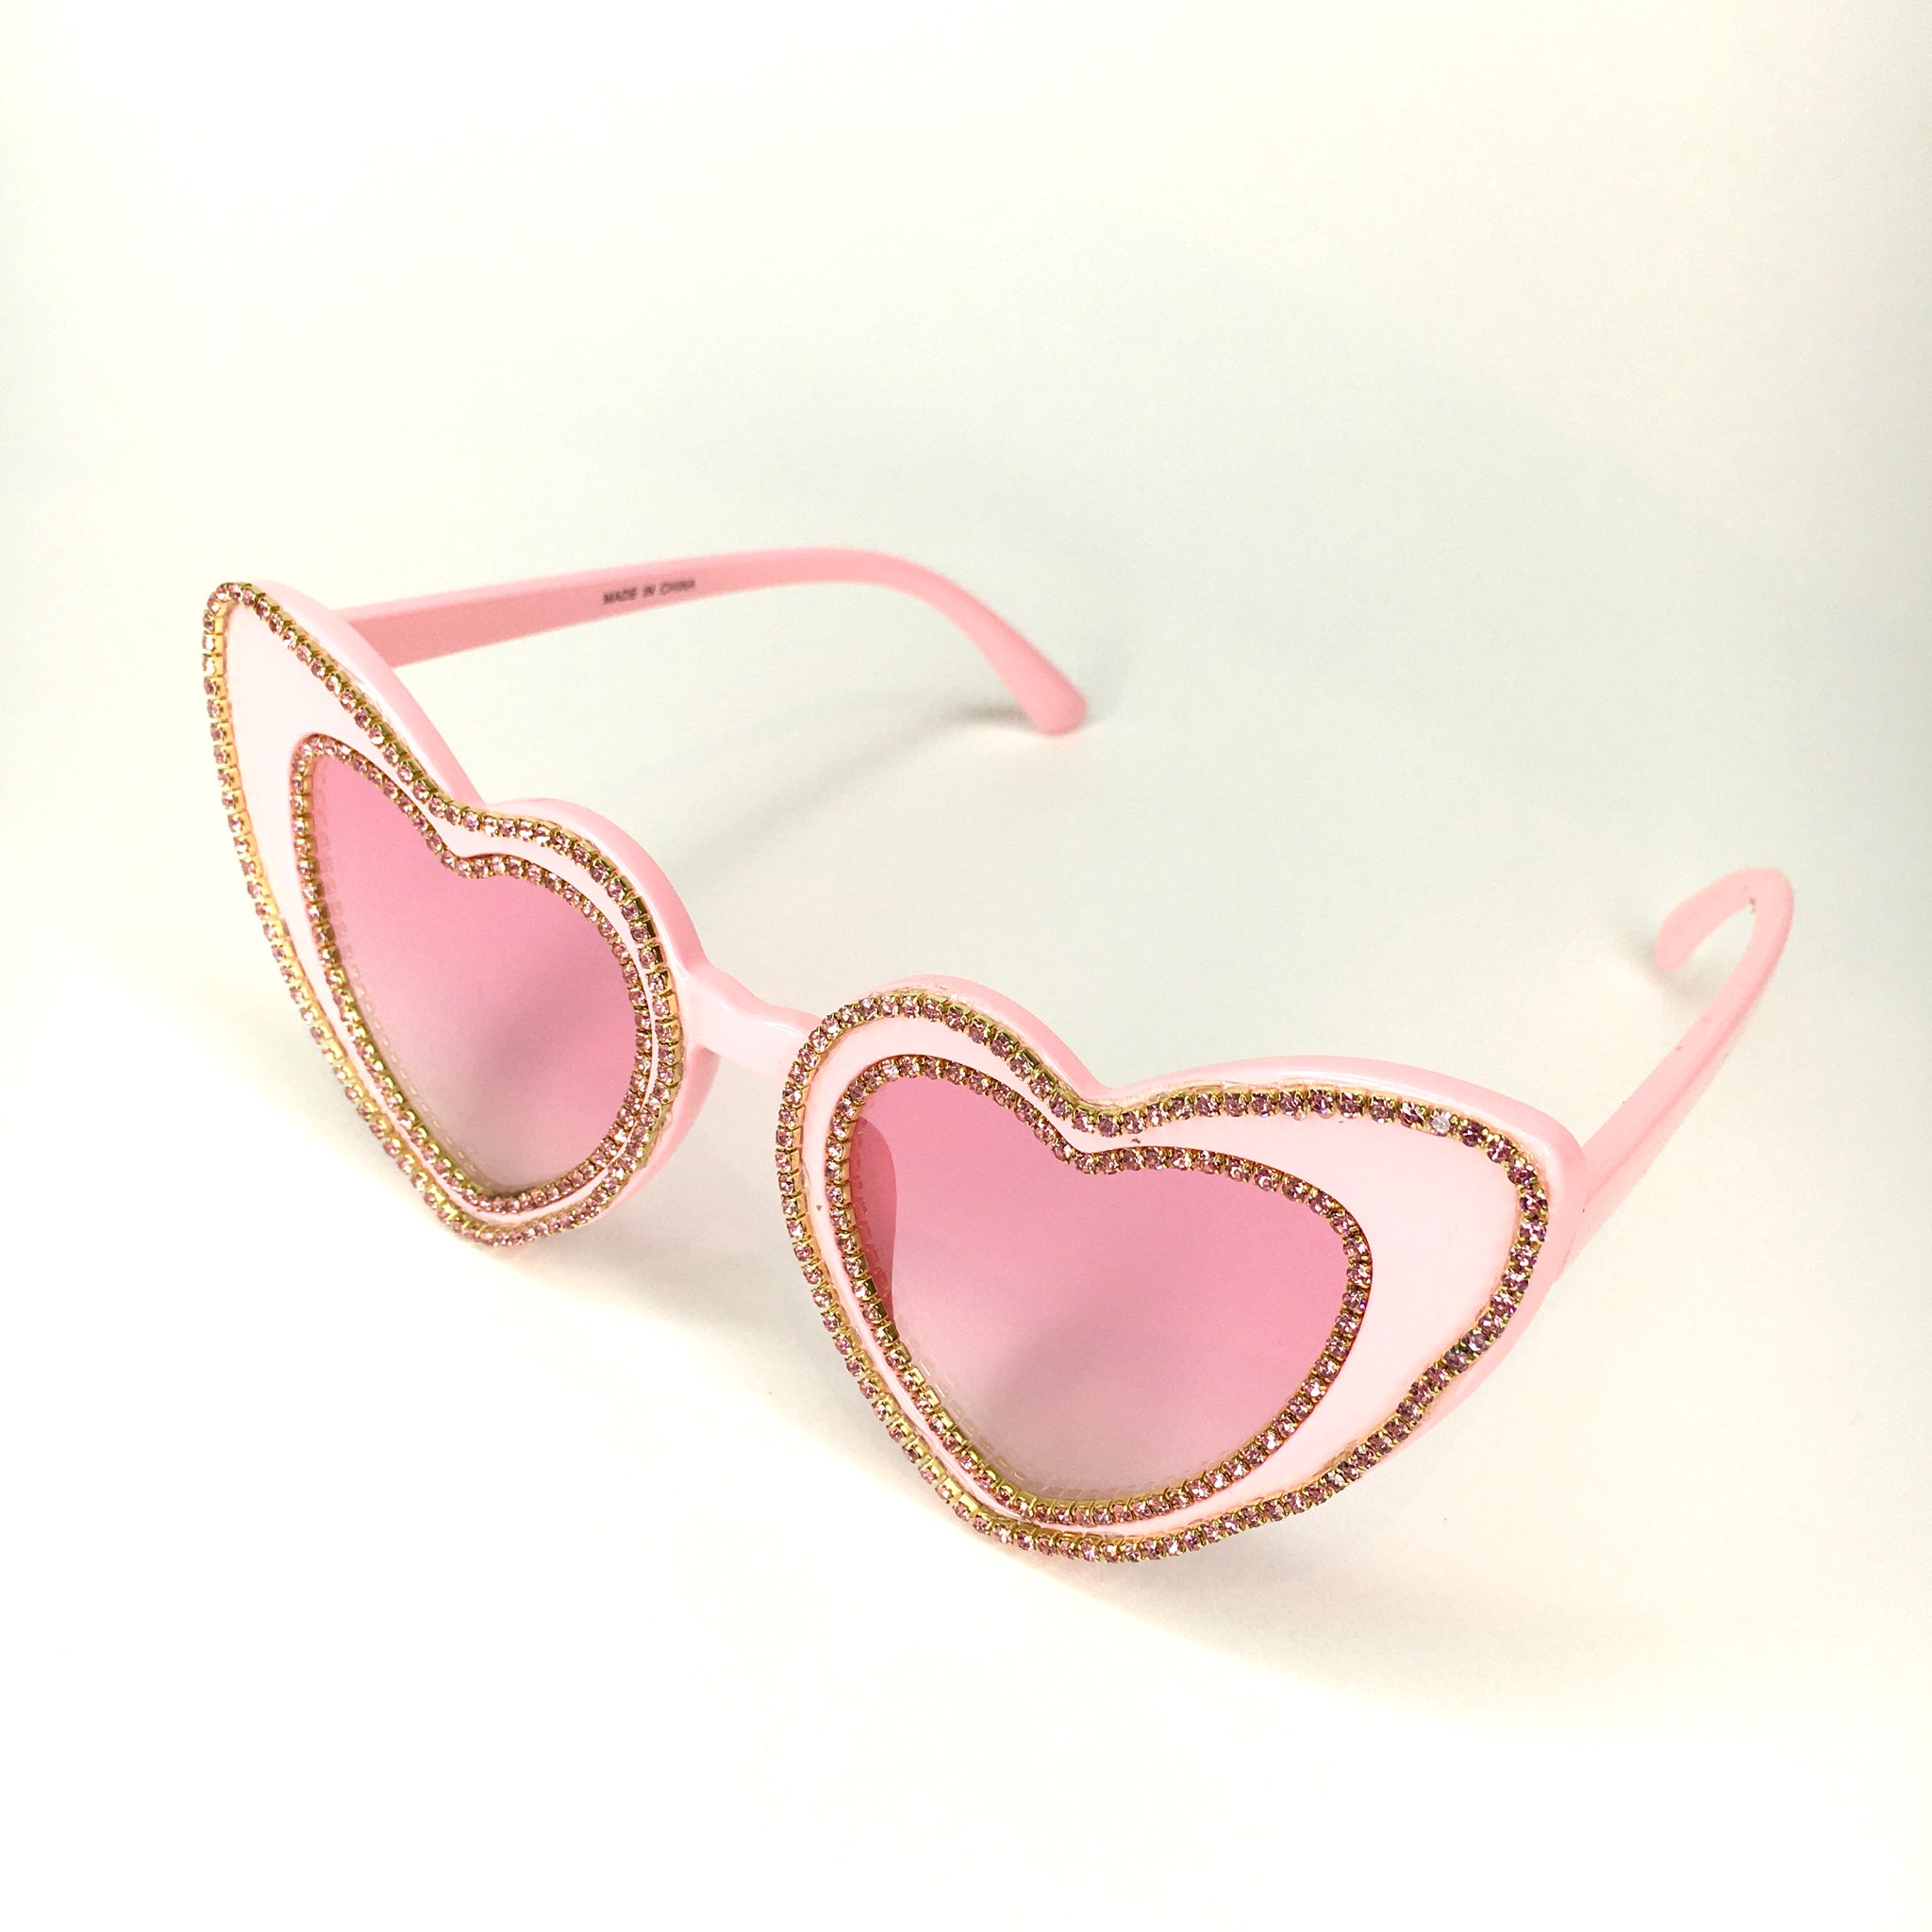 Sunnies / Blinged Out Lovecat